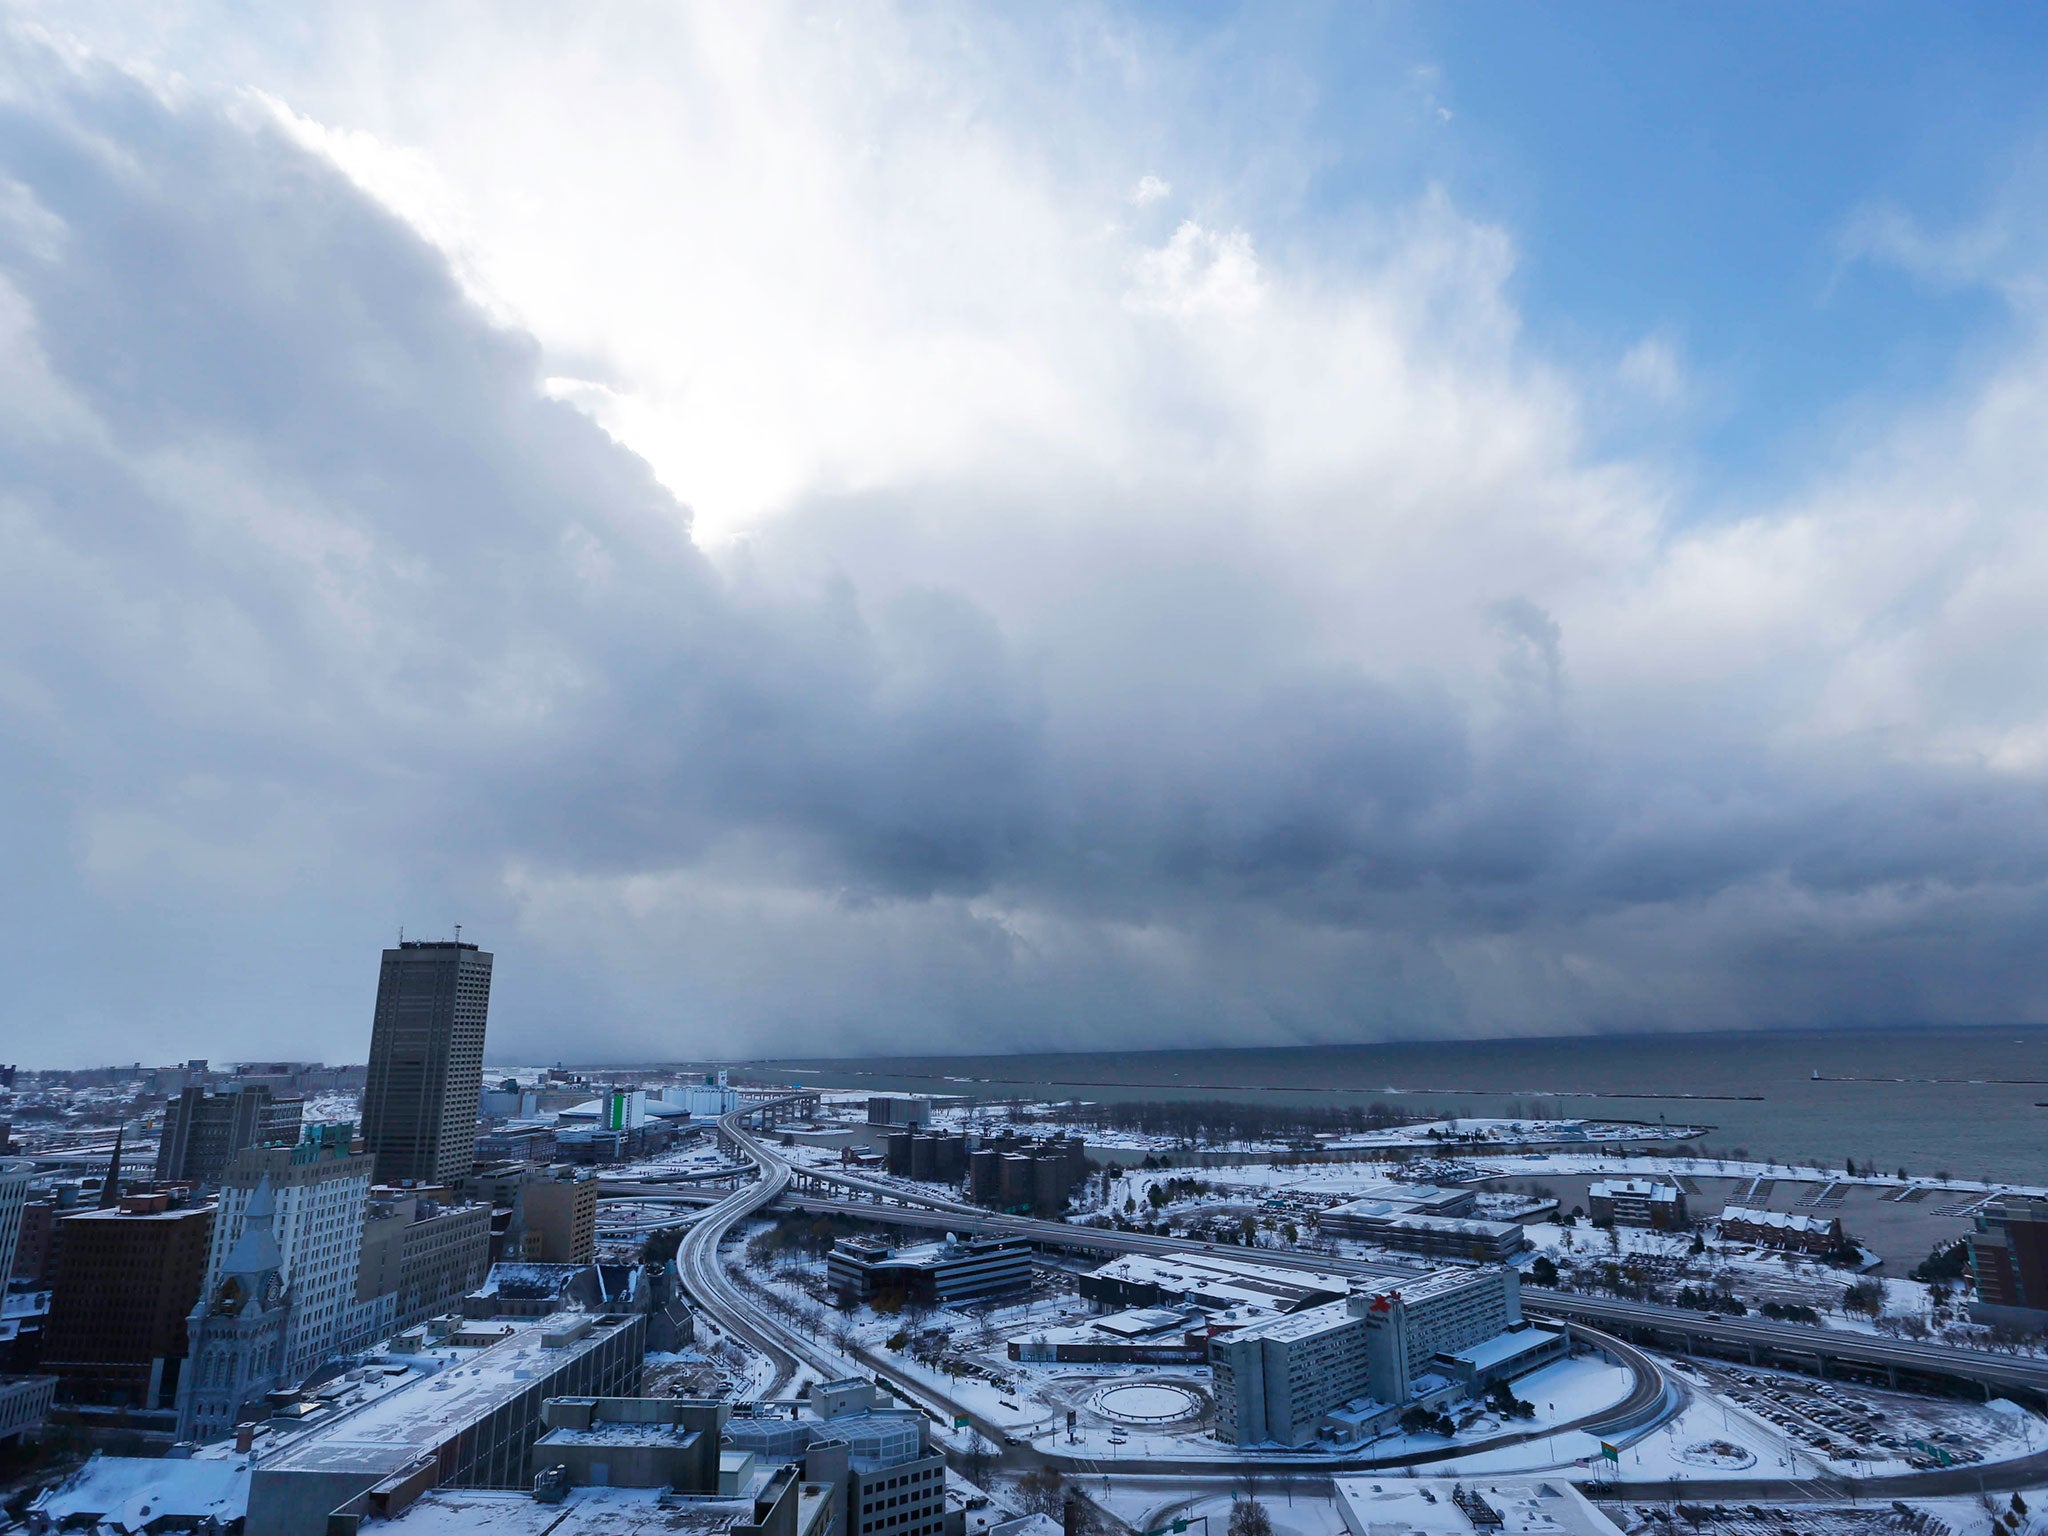 A massive band of lake effect snow moves through the south of Buffalo